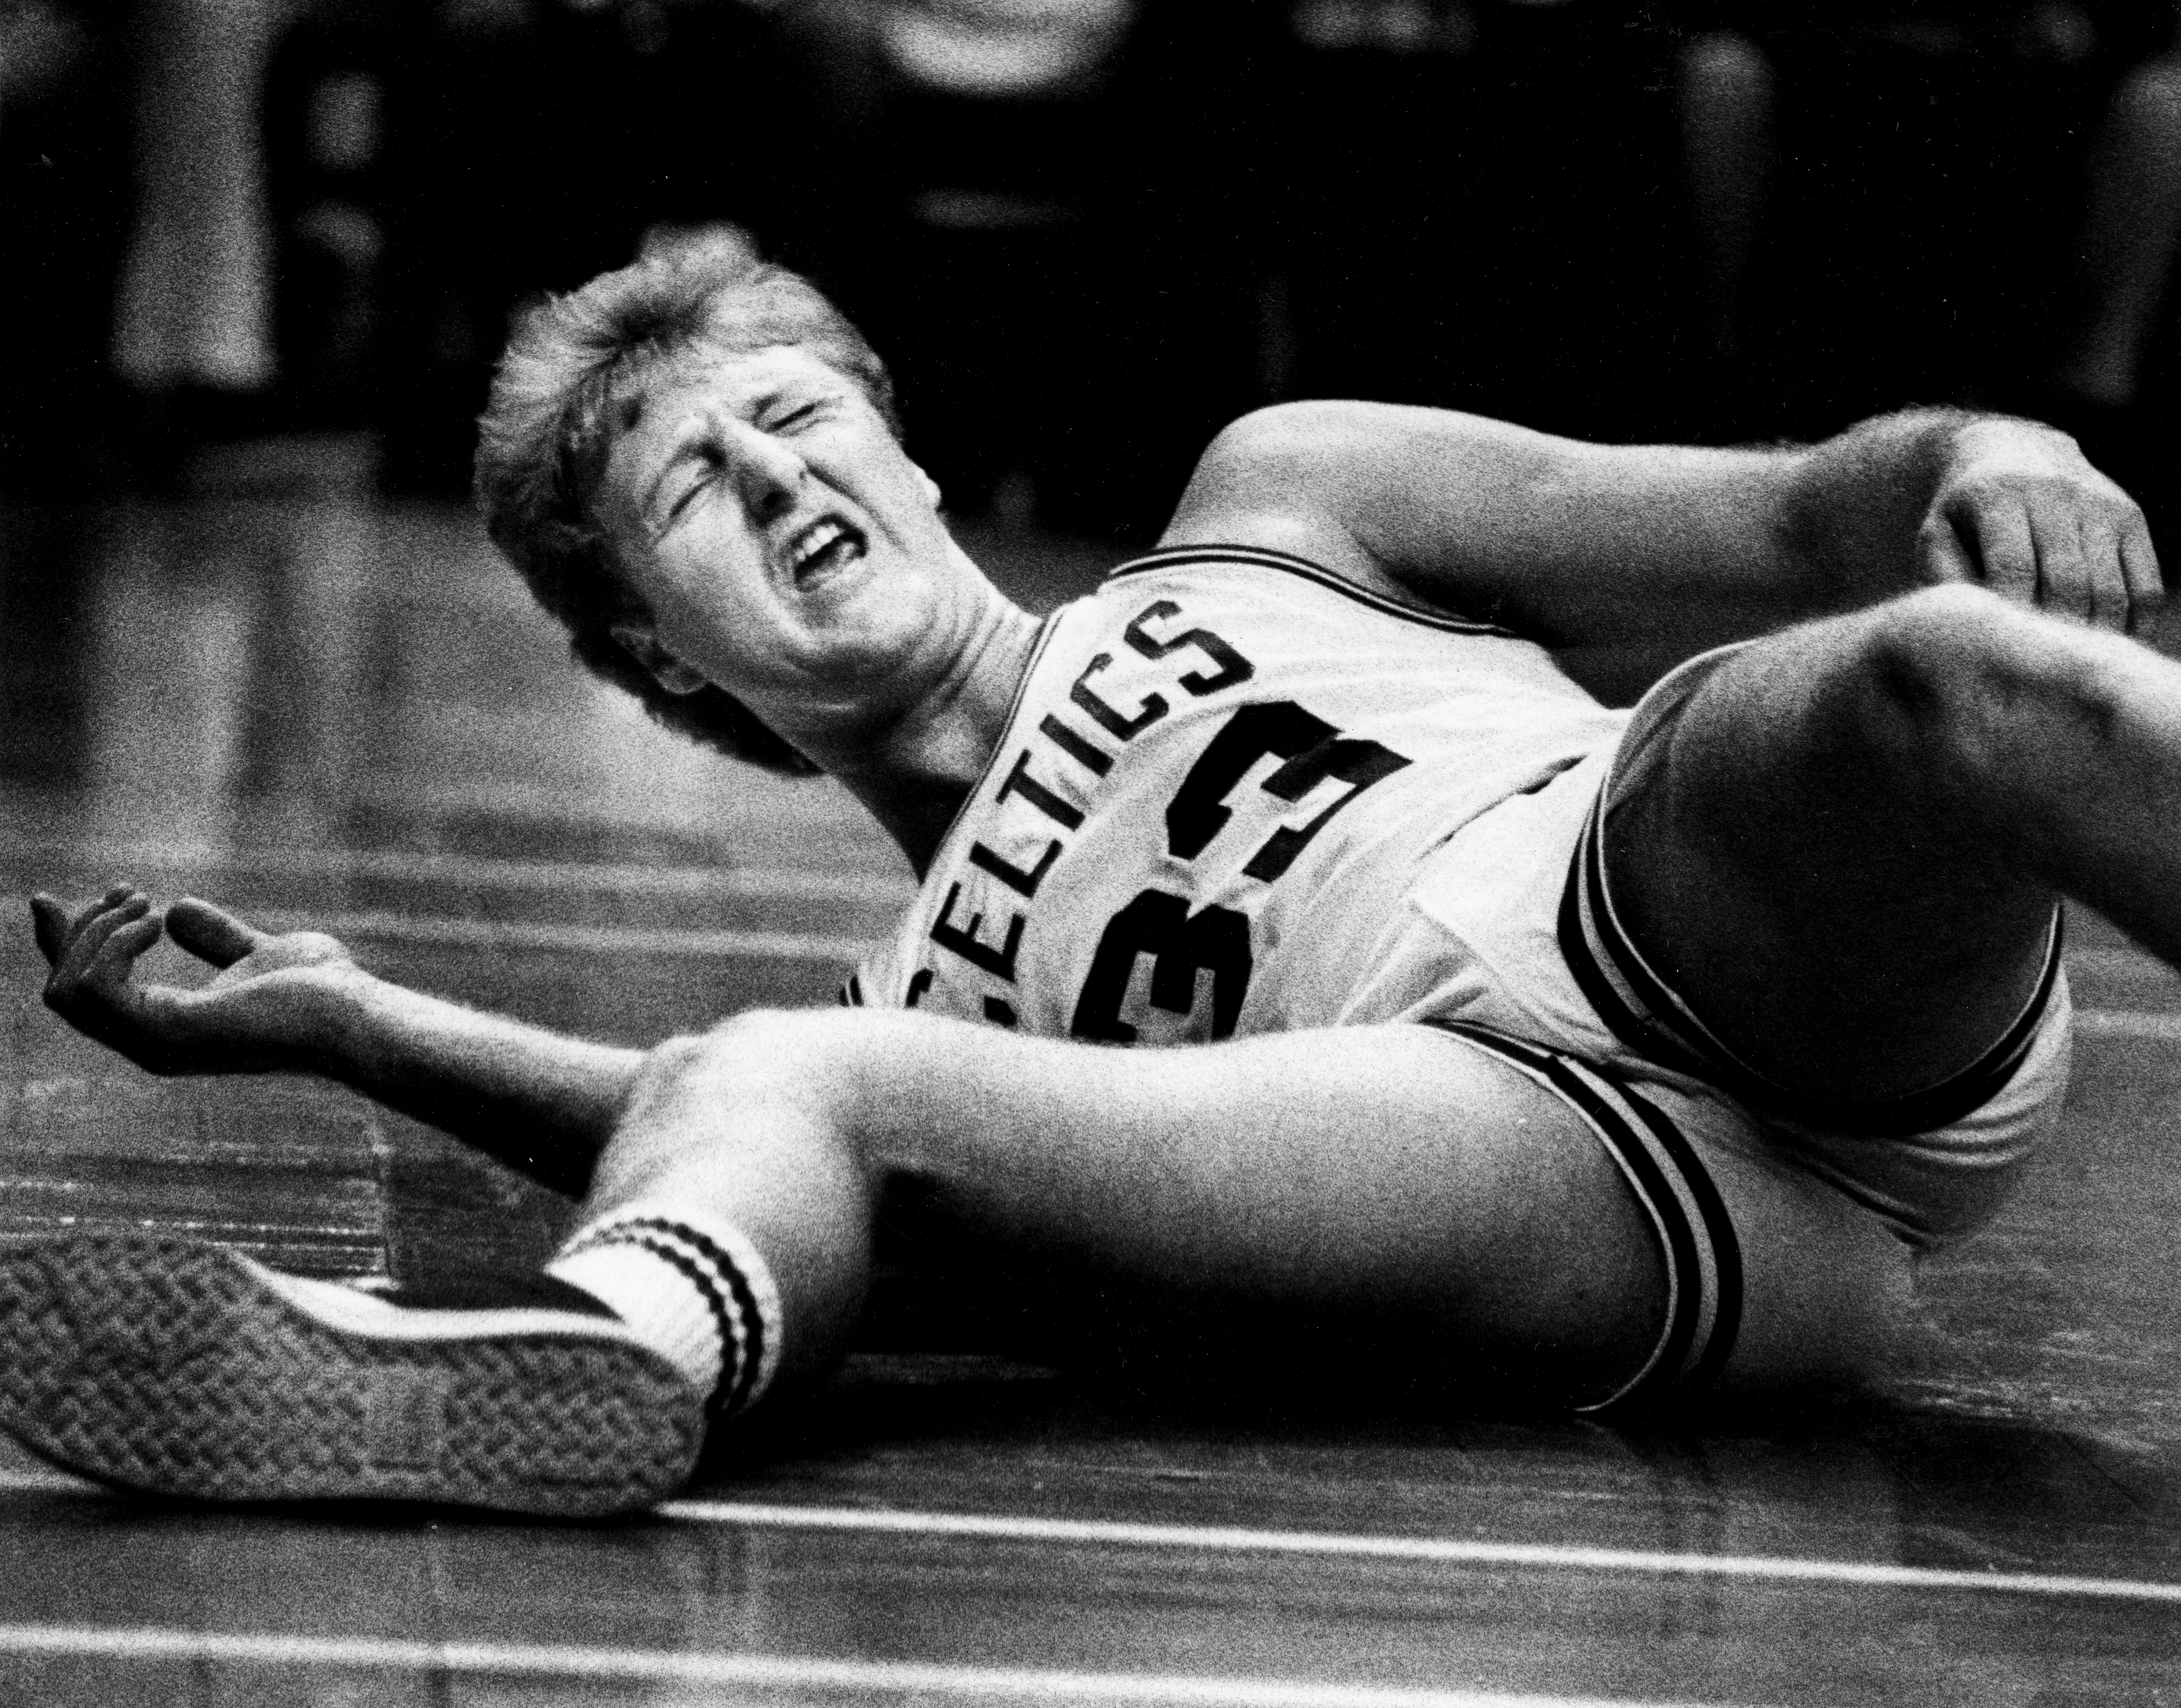 Boston Celtics legend Larry Bird writhes in pain during a game in April 1985